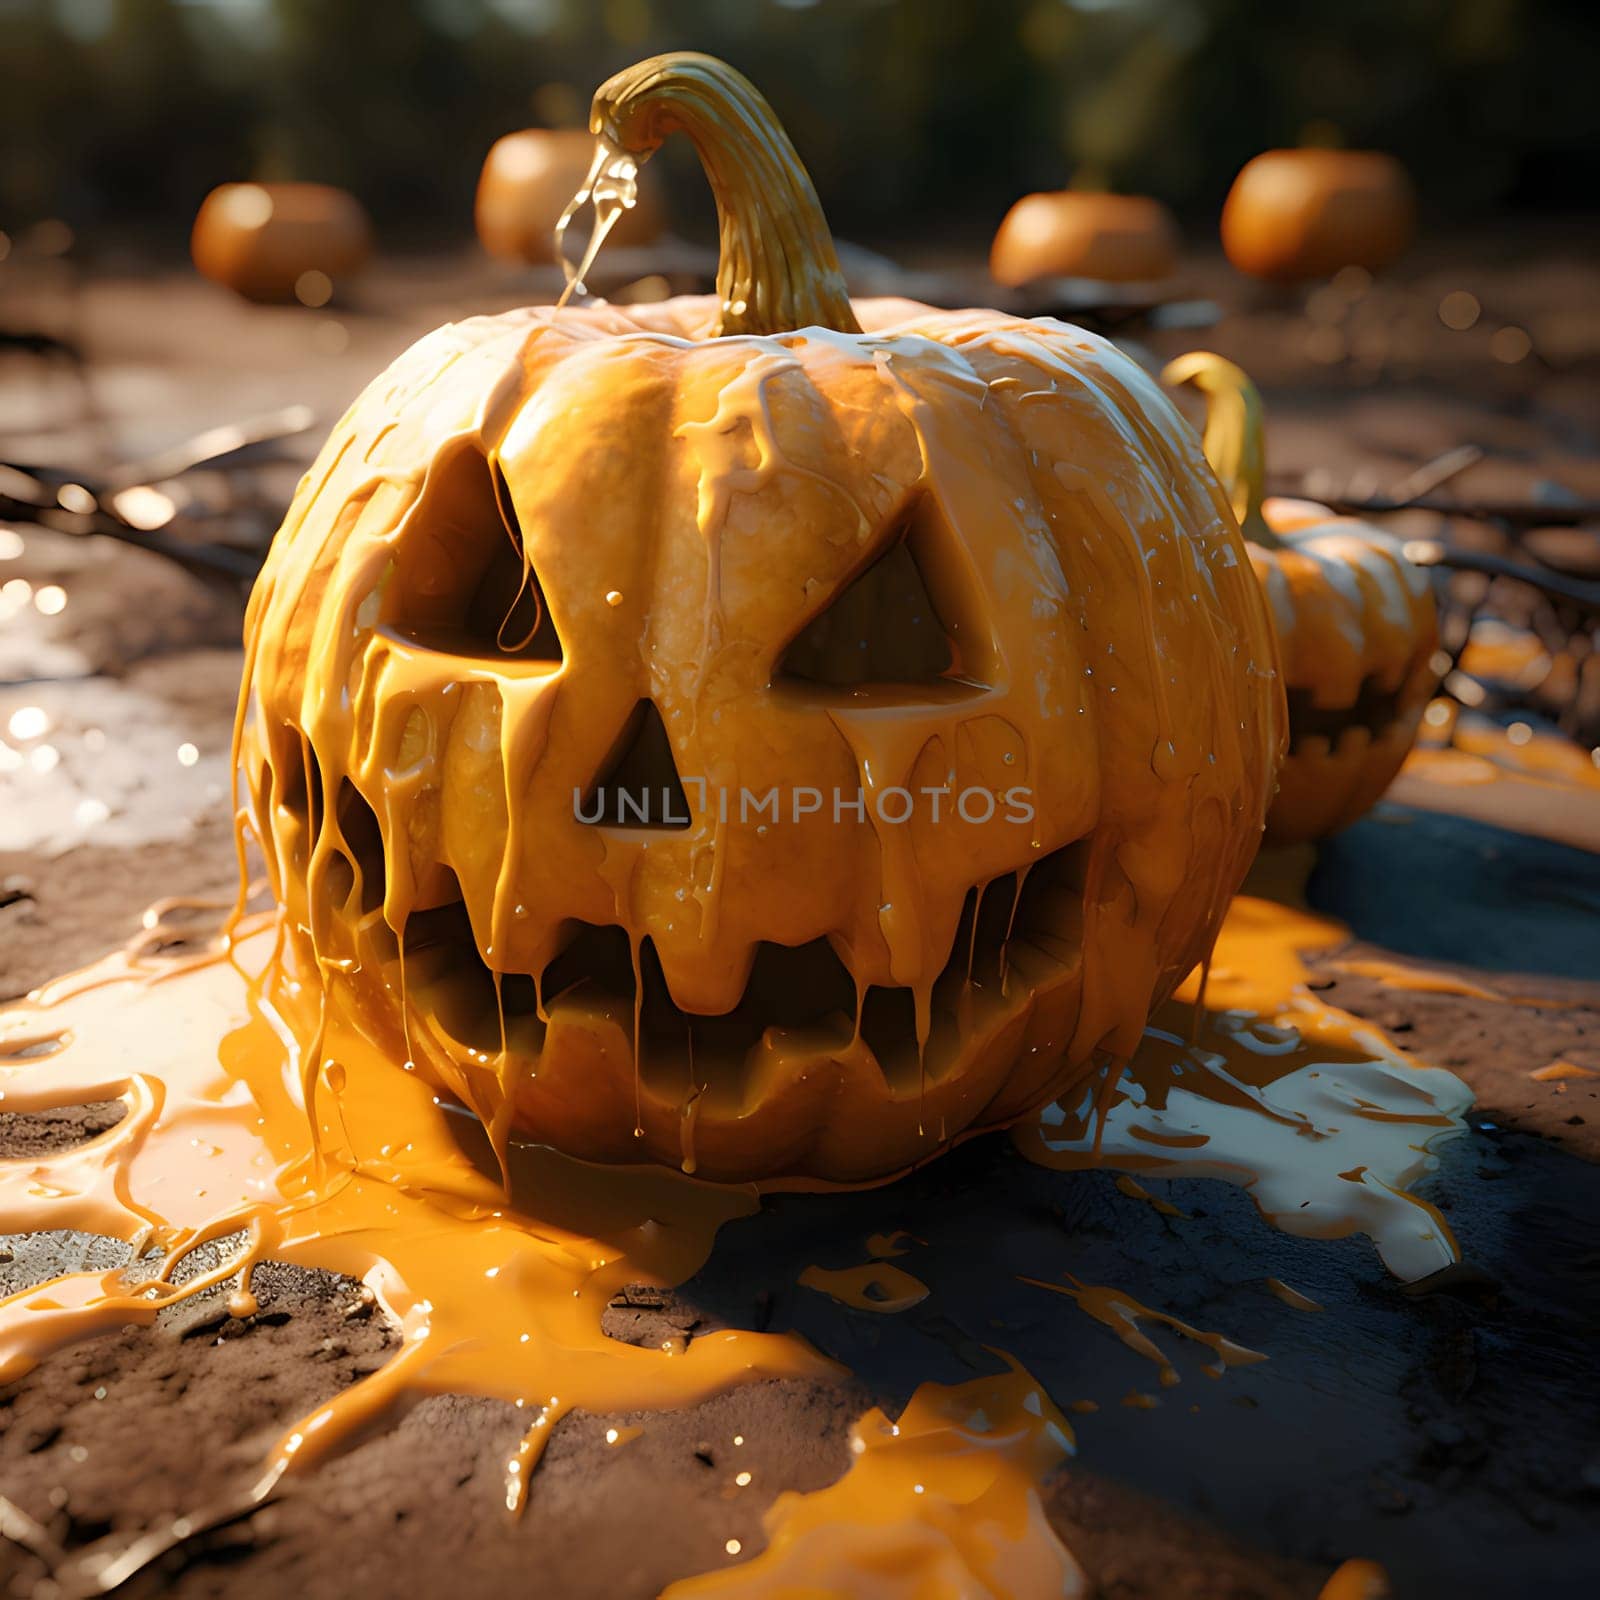 A paint-covered, dark jack-o-lantern pumpkin, a Halloween image. Atmosphere of darkness and fear.